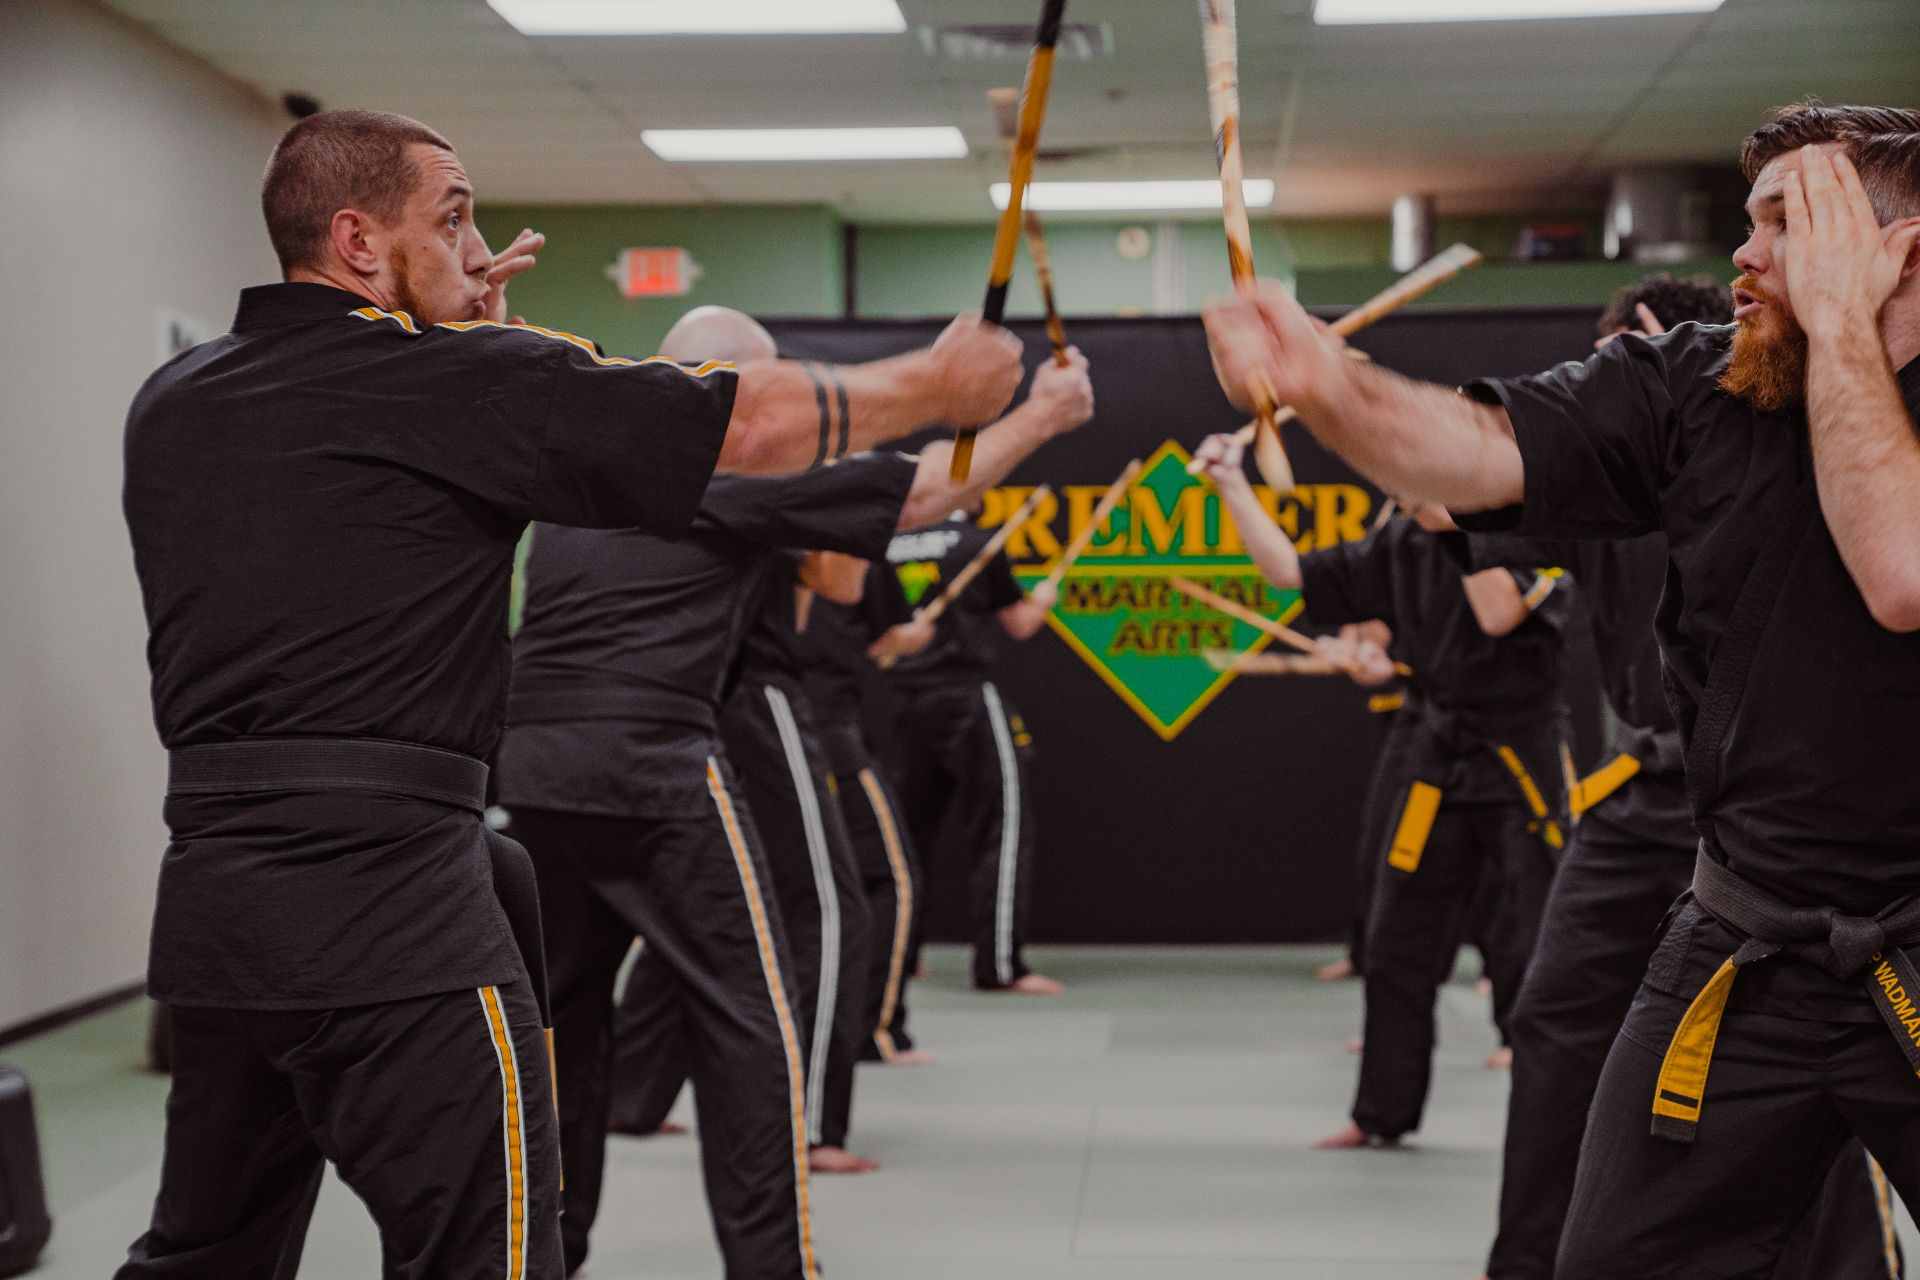 martial arts requires focus and physical stamina making it a great workout